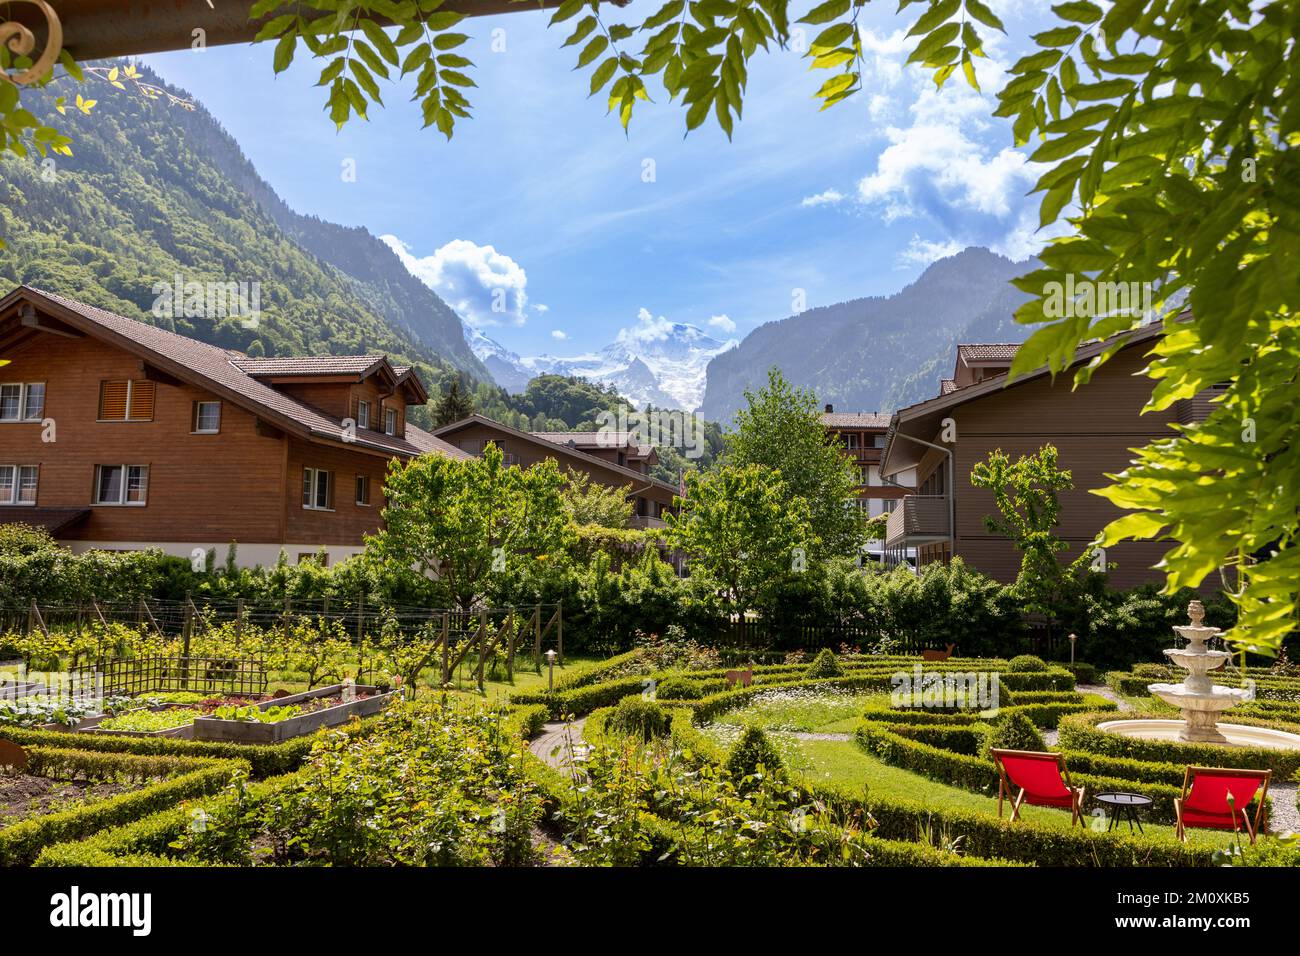 Gardens of the Alpenrose Hotel And gardens with traditional Swiss buildings in the back and the Jungfrau mountain in the far back. Stock Photo